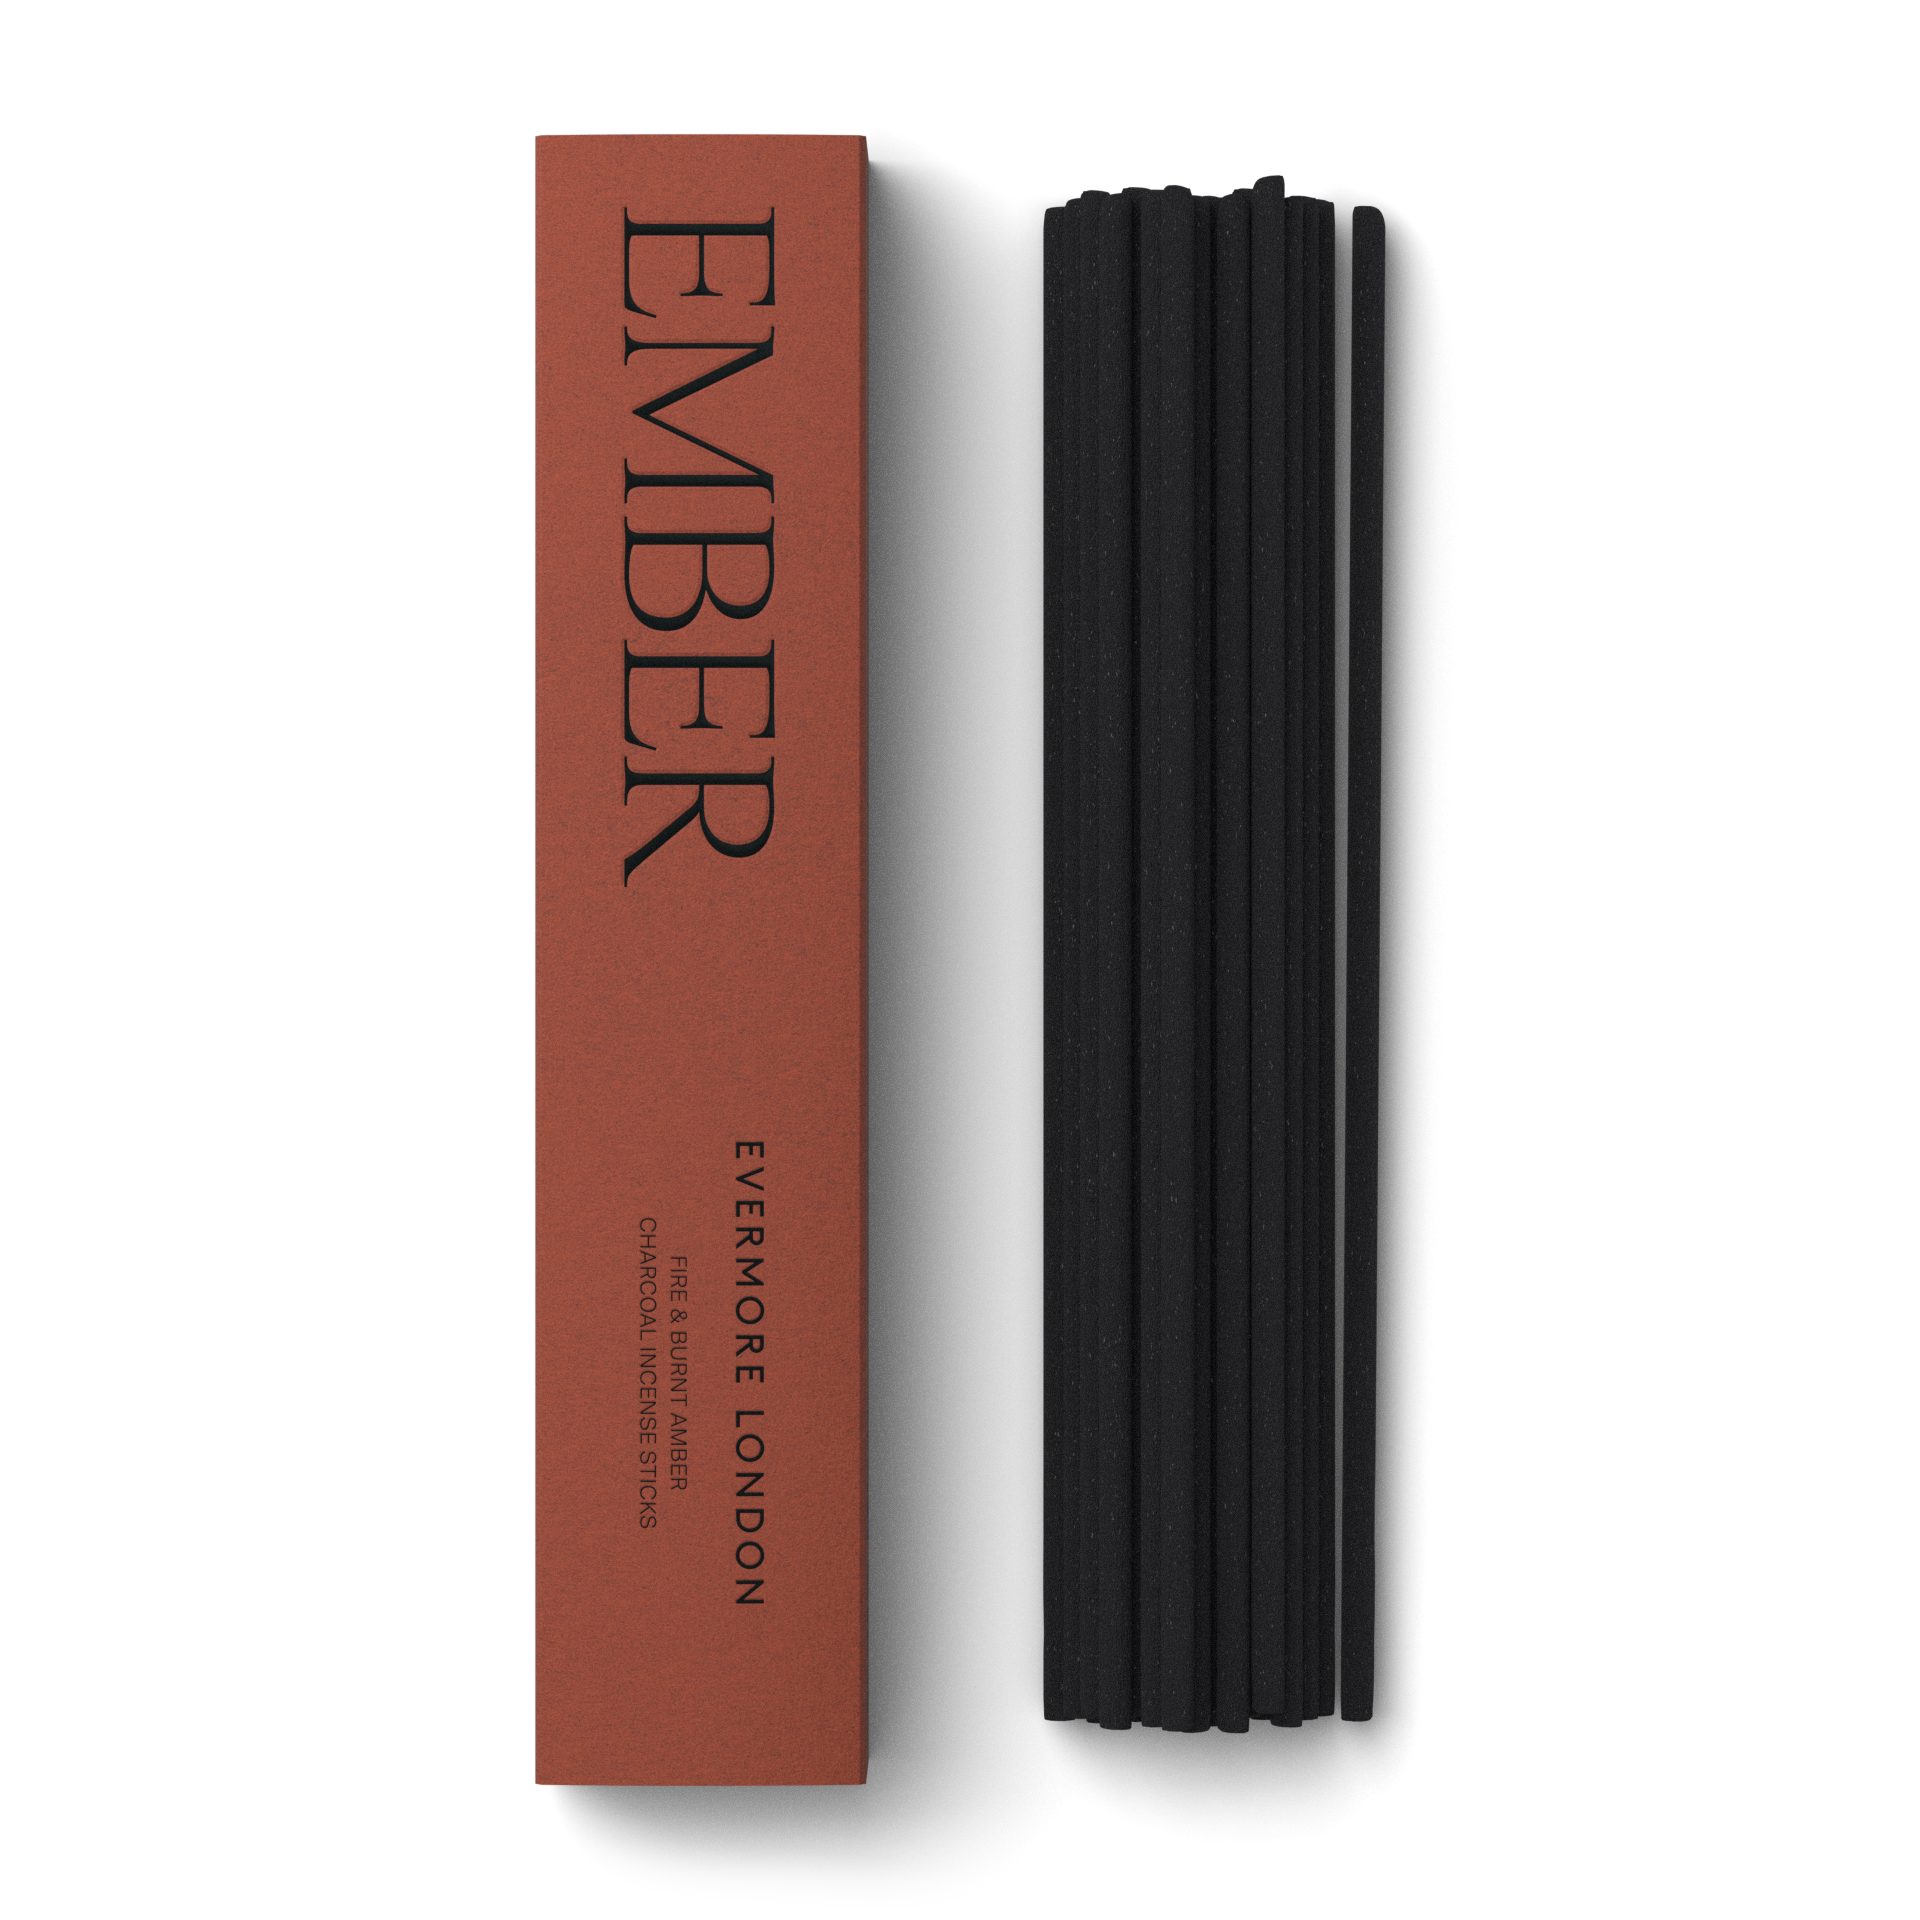 Evermore Ember Incense